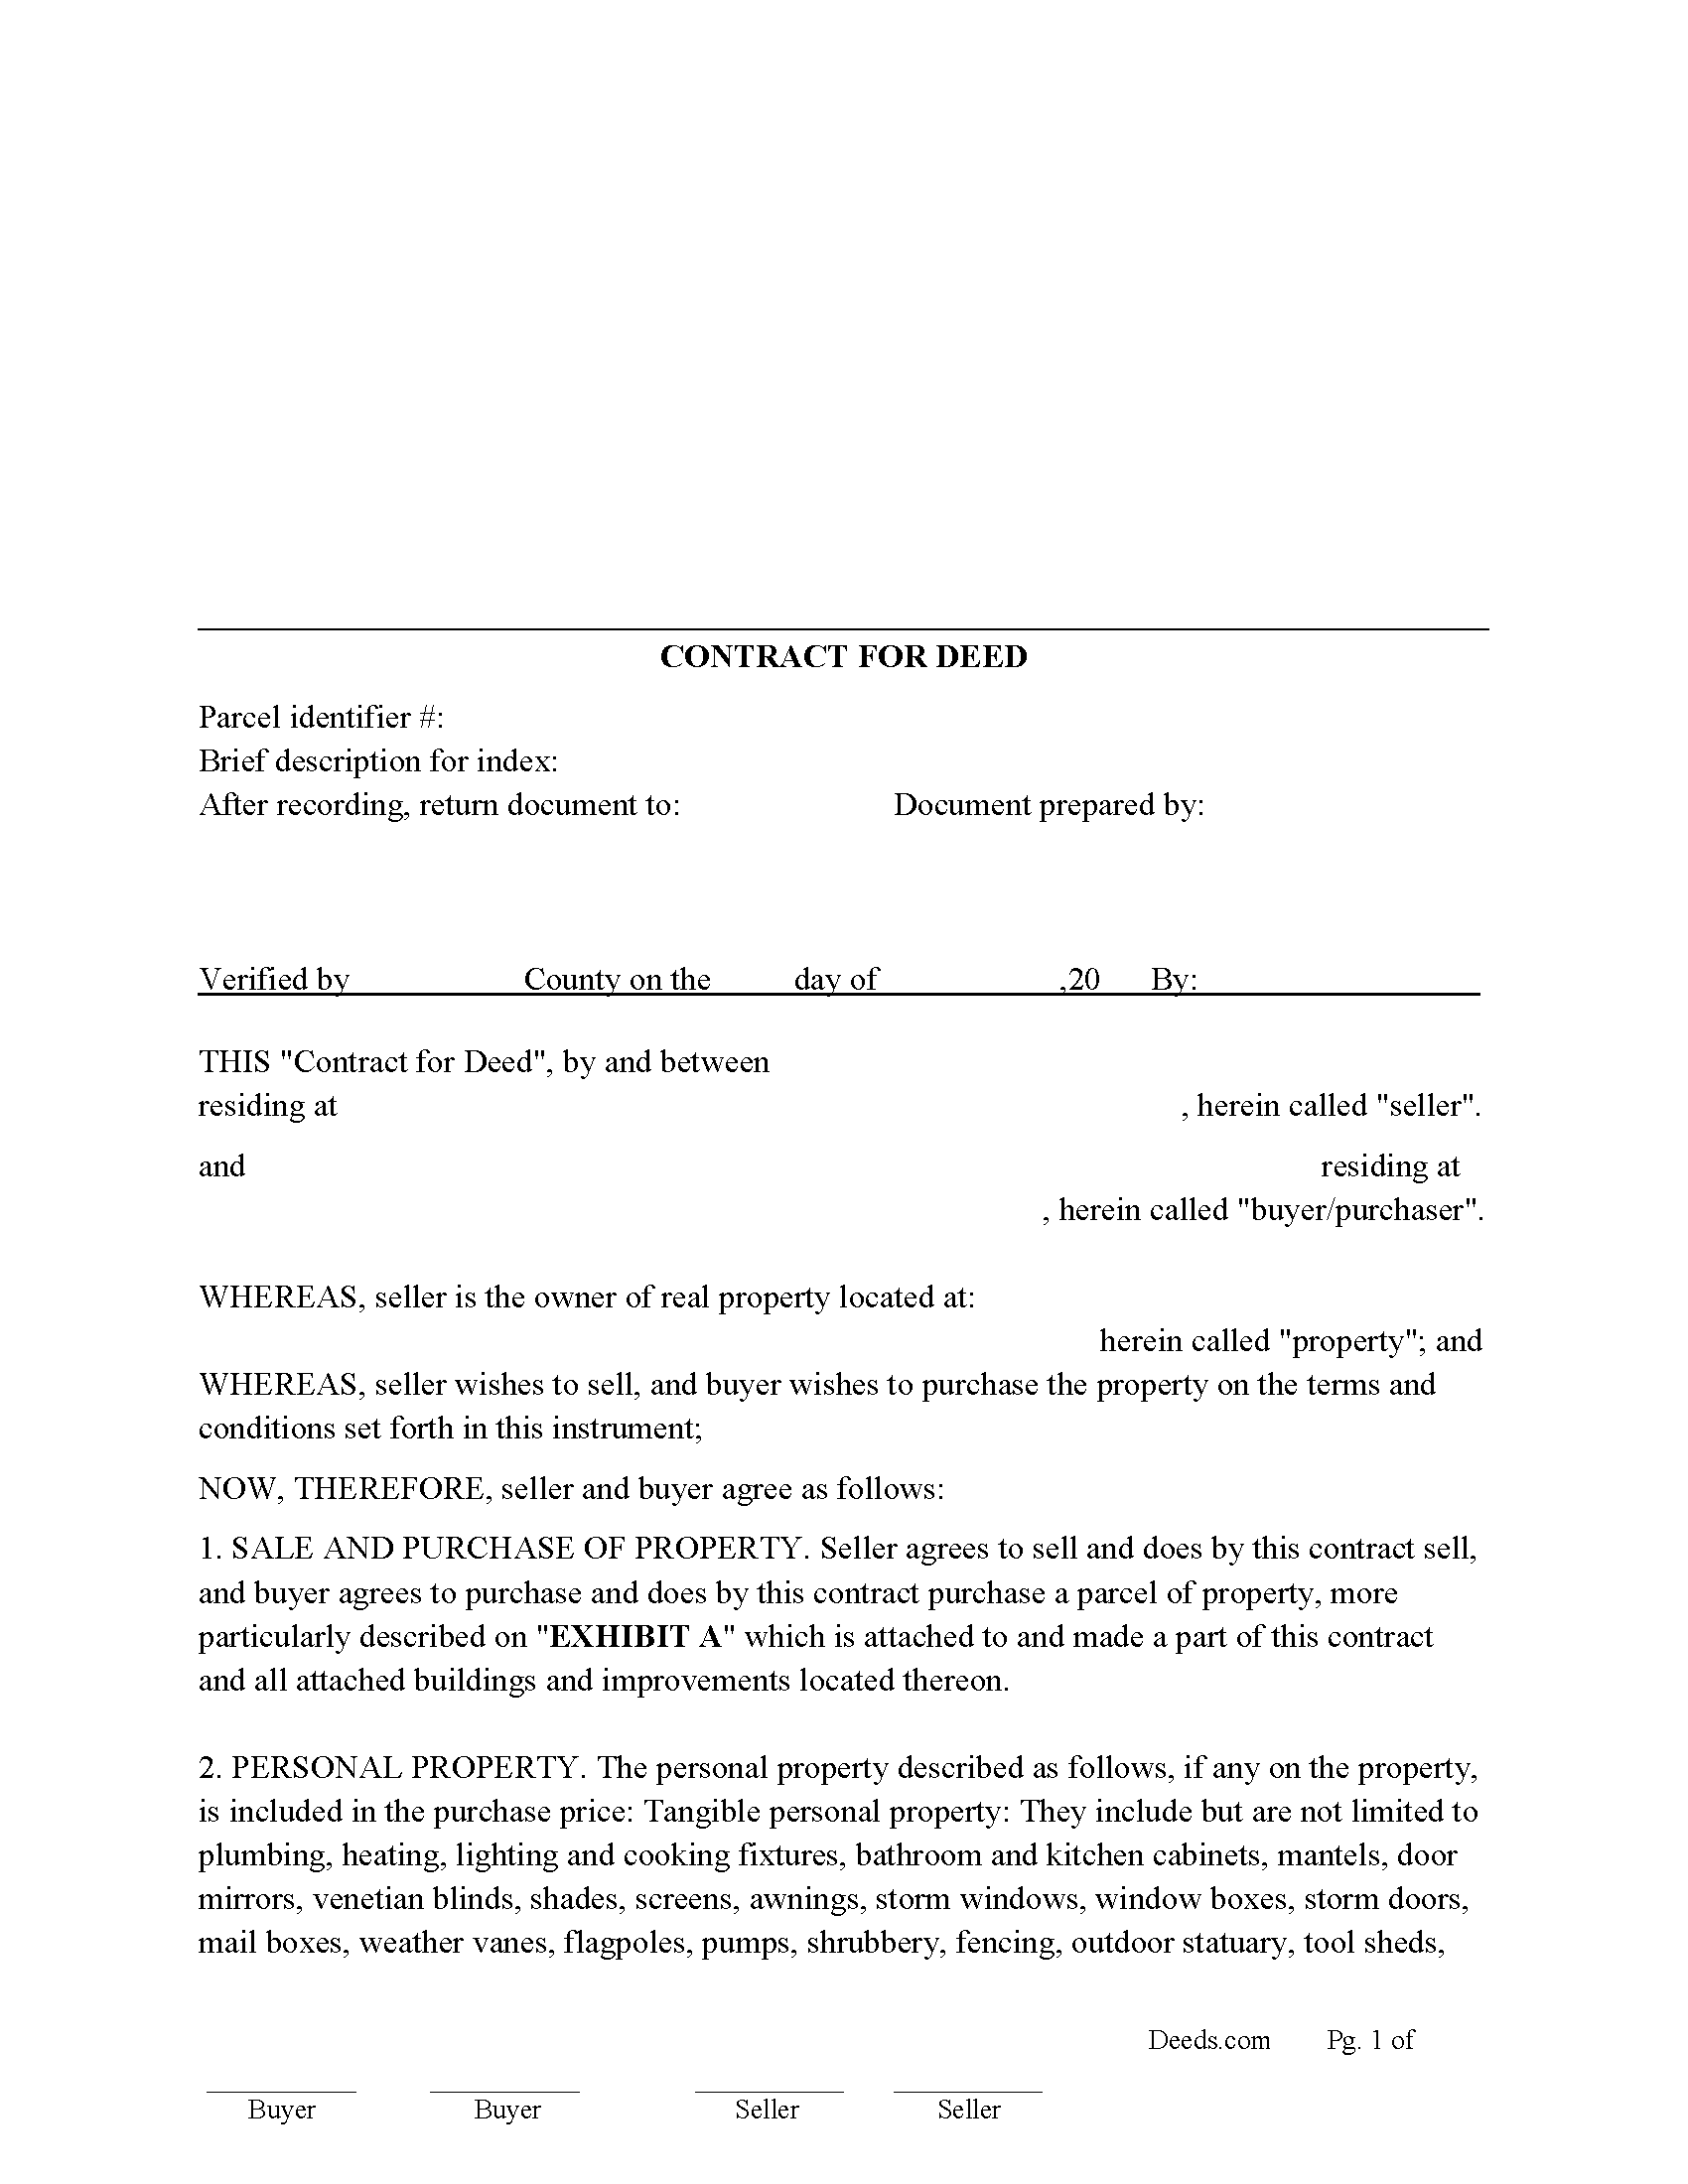 North Carolina Contract for Deed Image